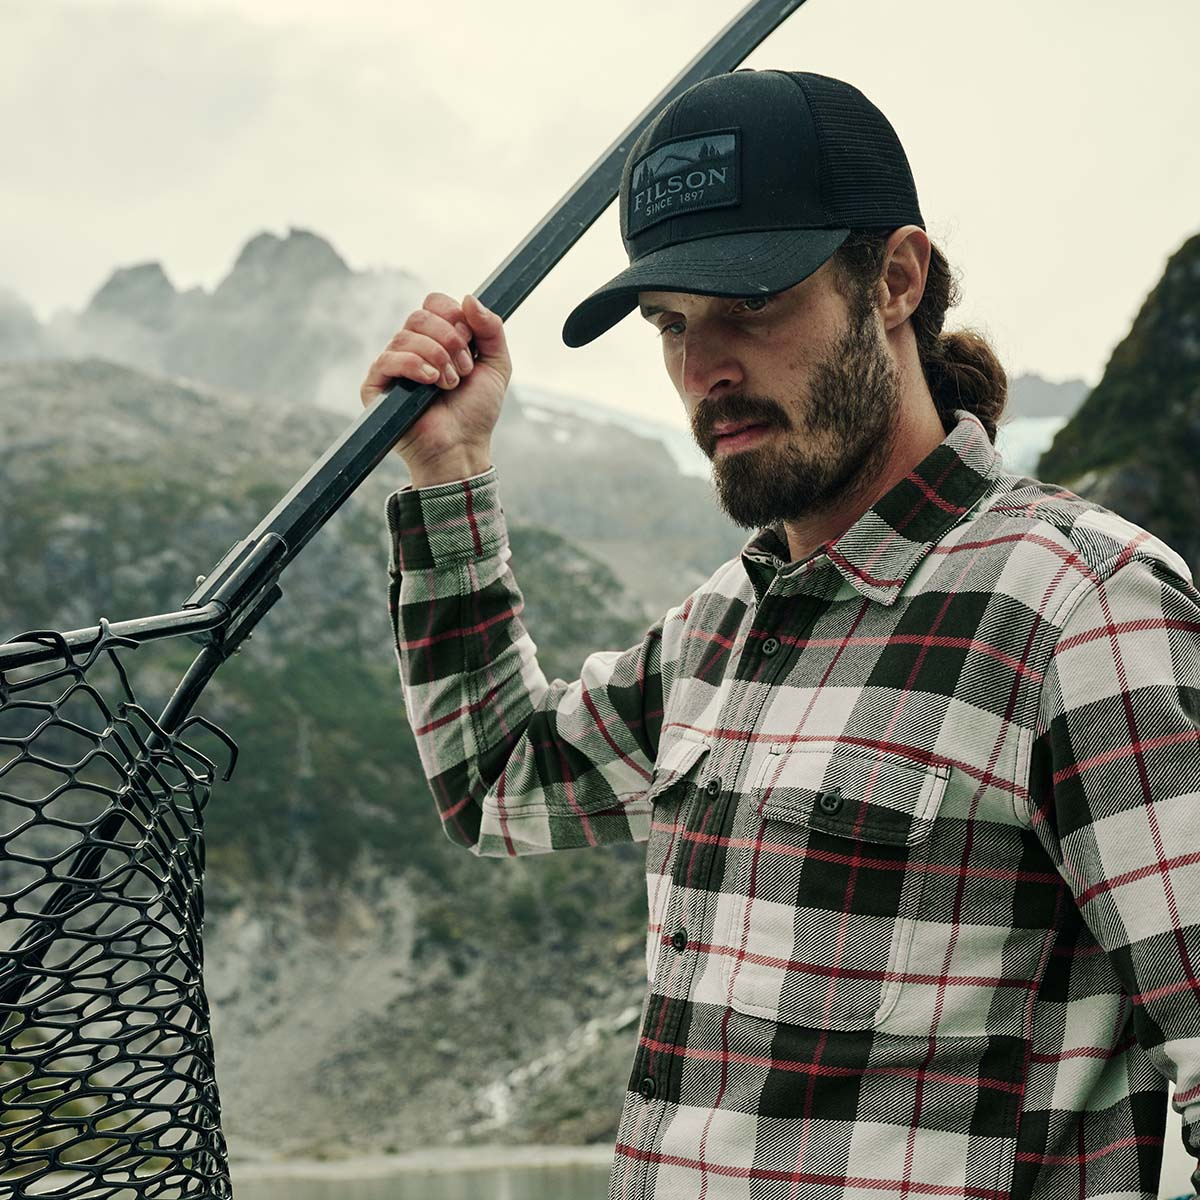 Filson Logger Mesh Cap Black, a durable cap with mesh back for